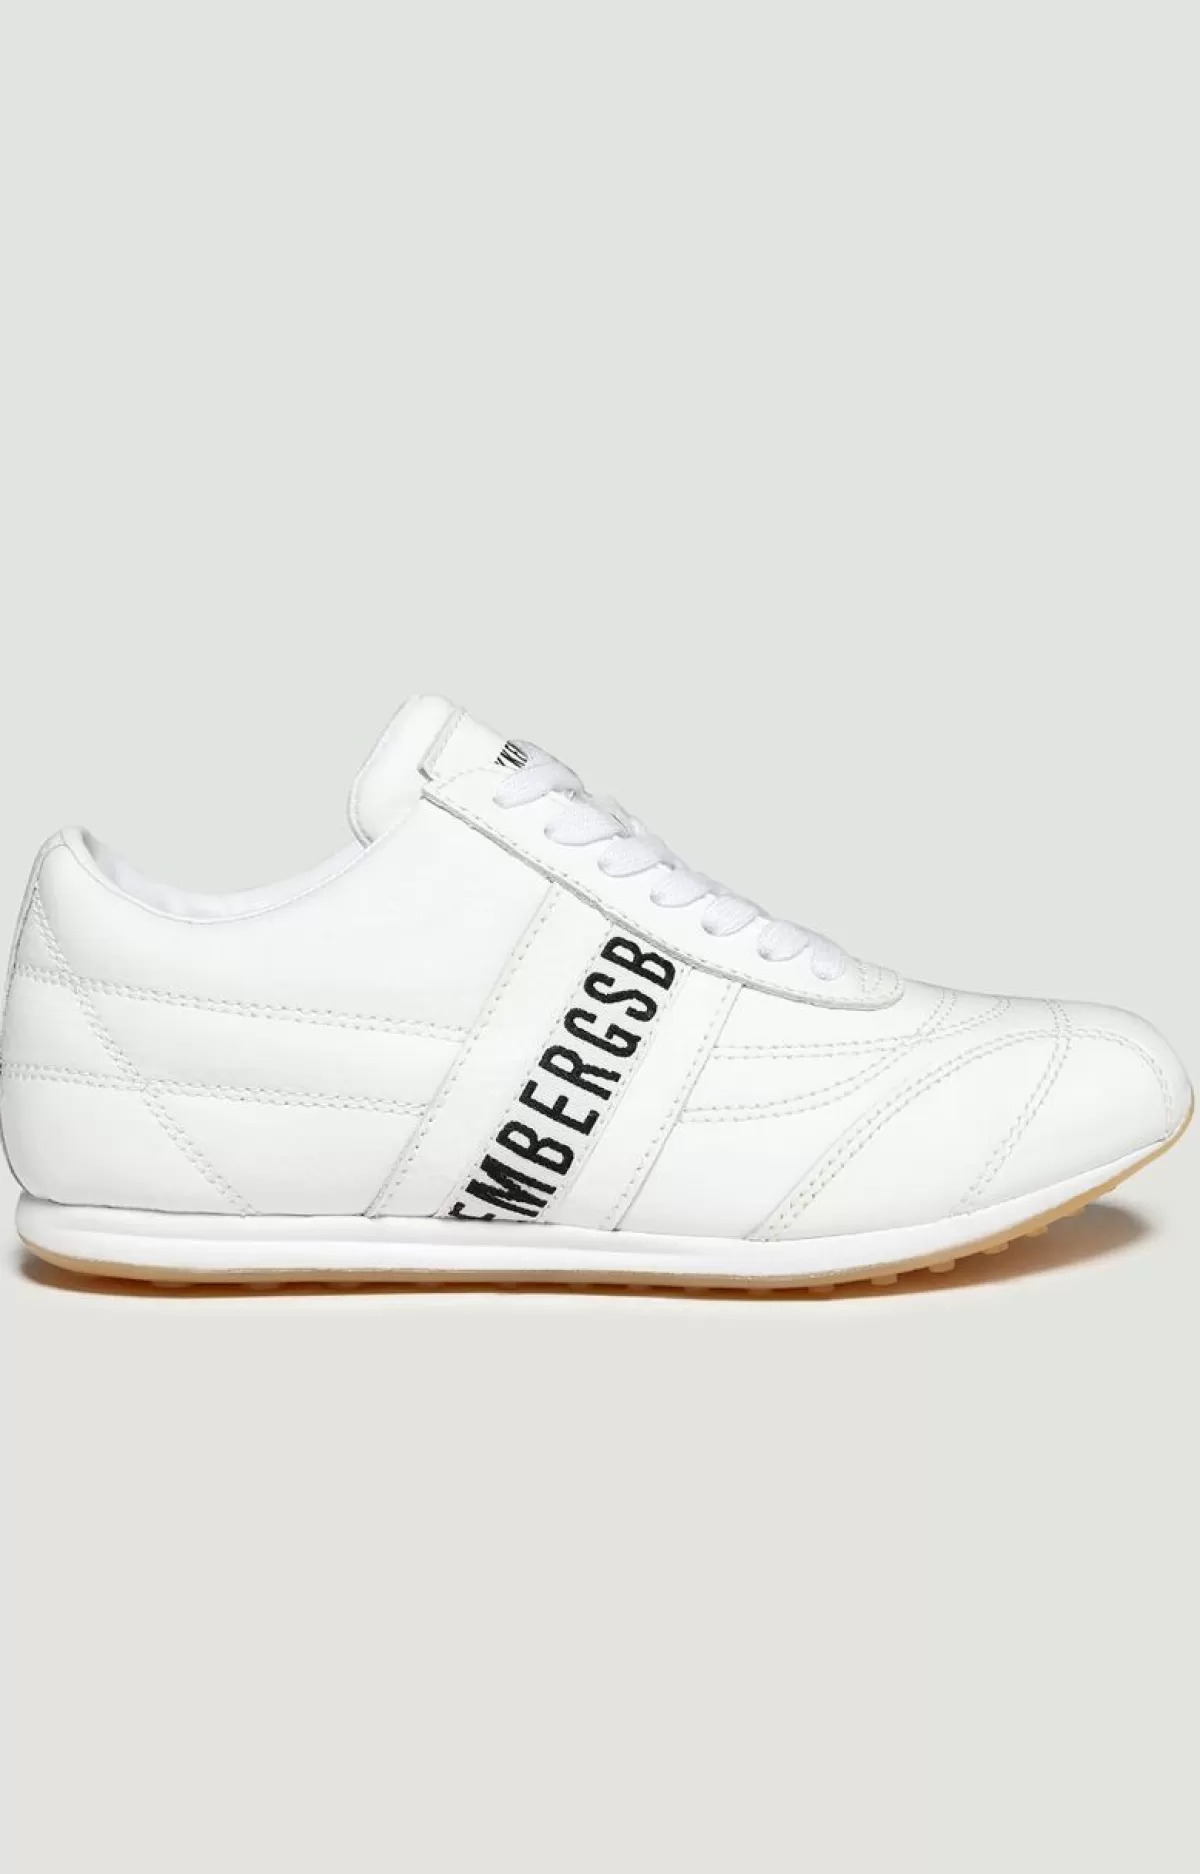 Bikkembergs Bahia Women'S Sneakers In Patent Leather White Fashion